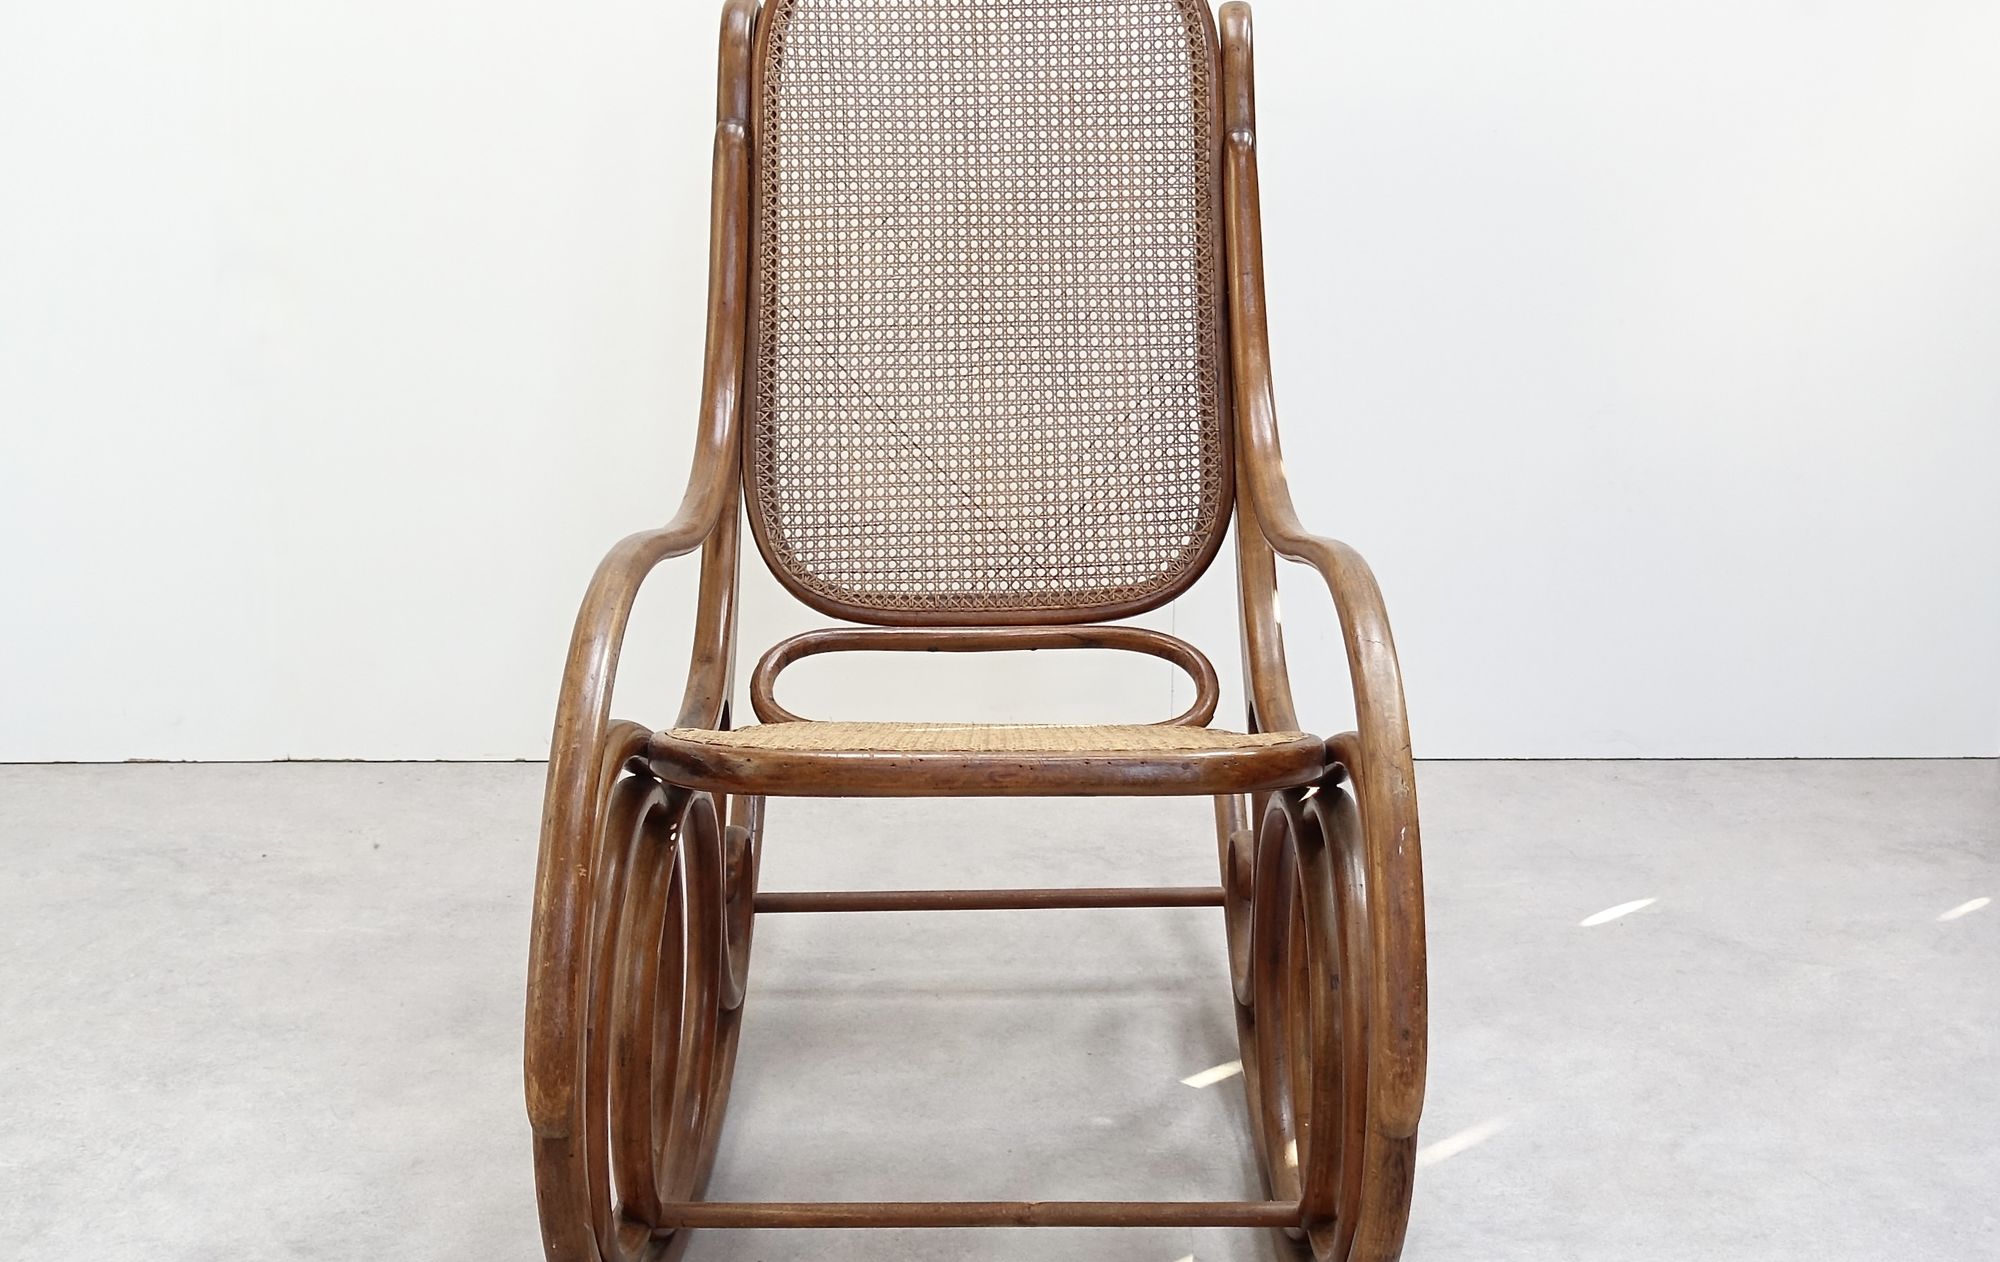 Beautiful bentwood chair typical of Michel Thonet's